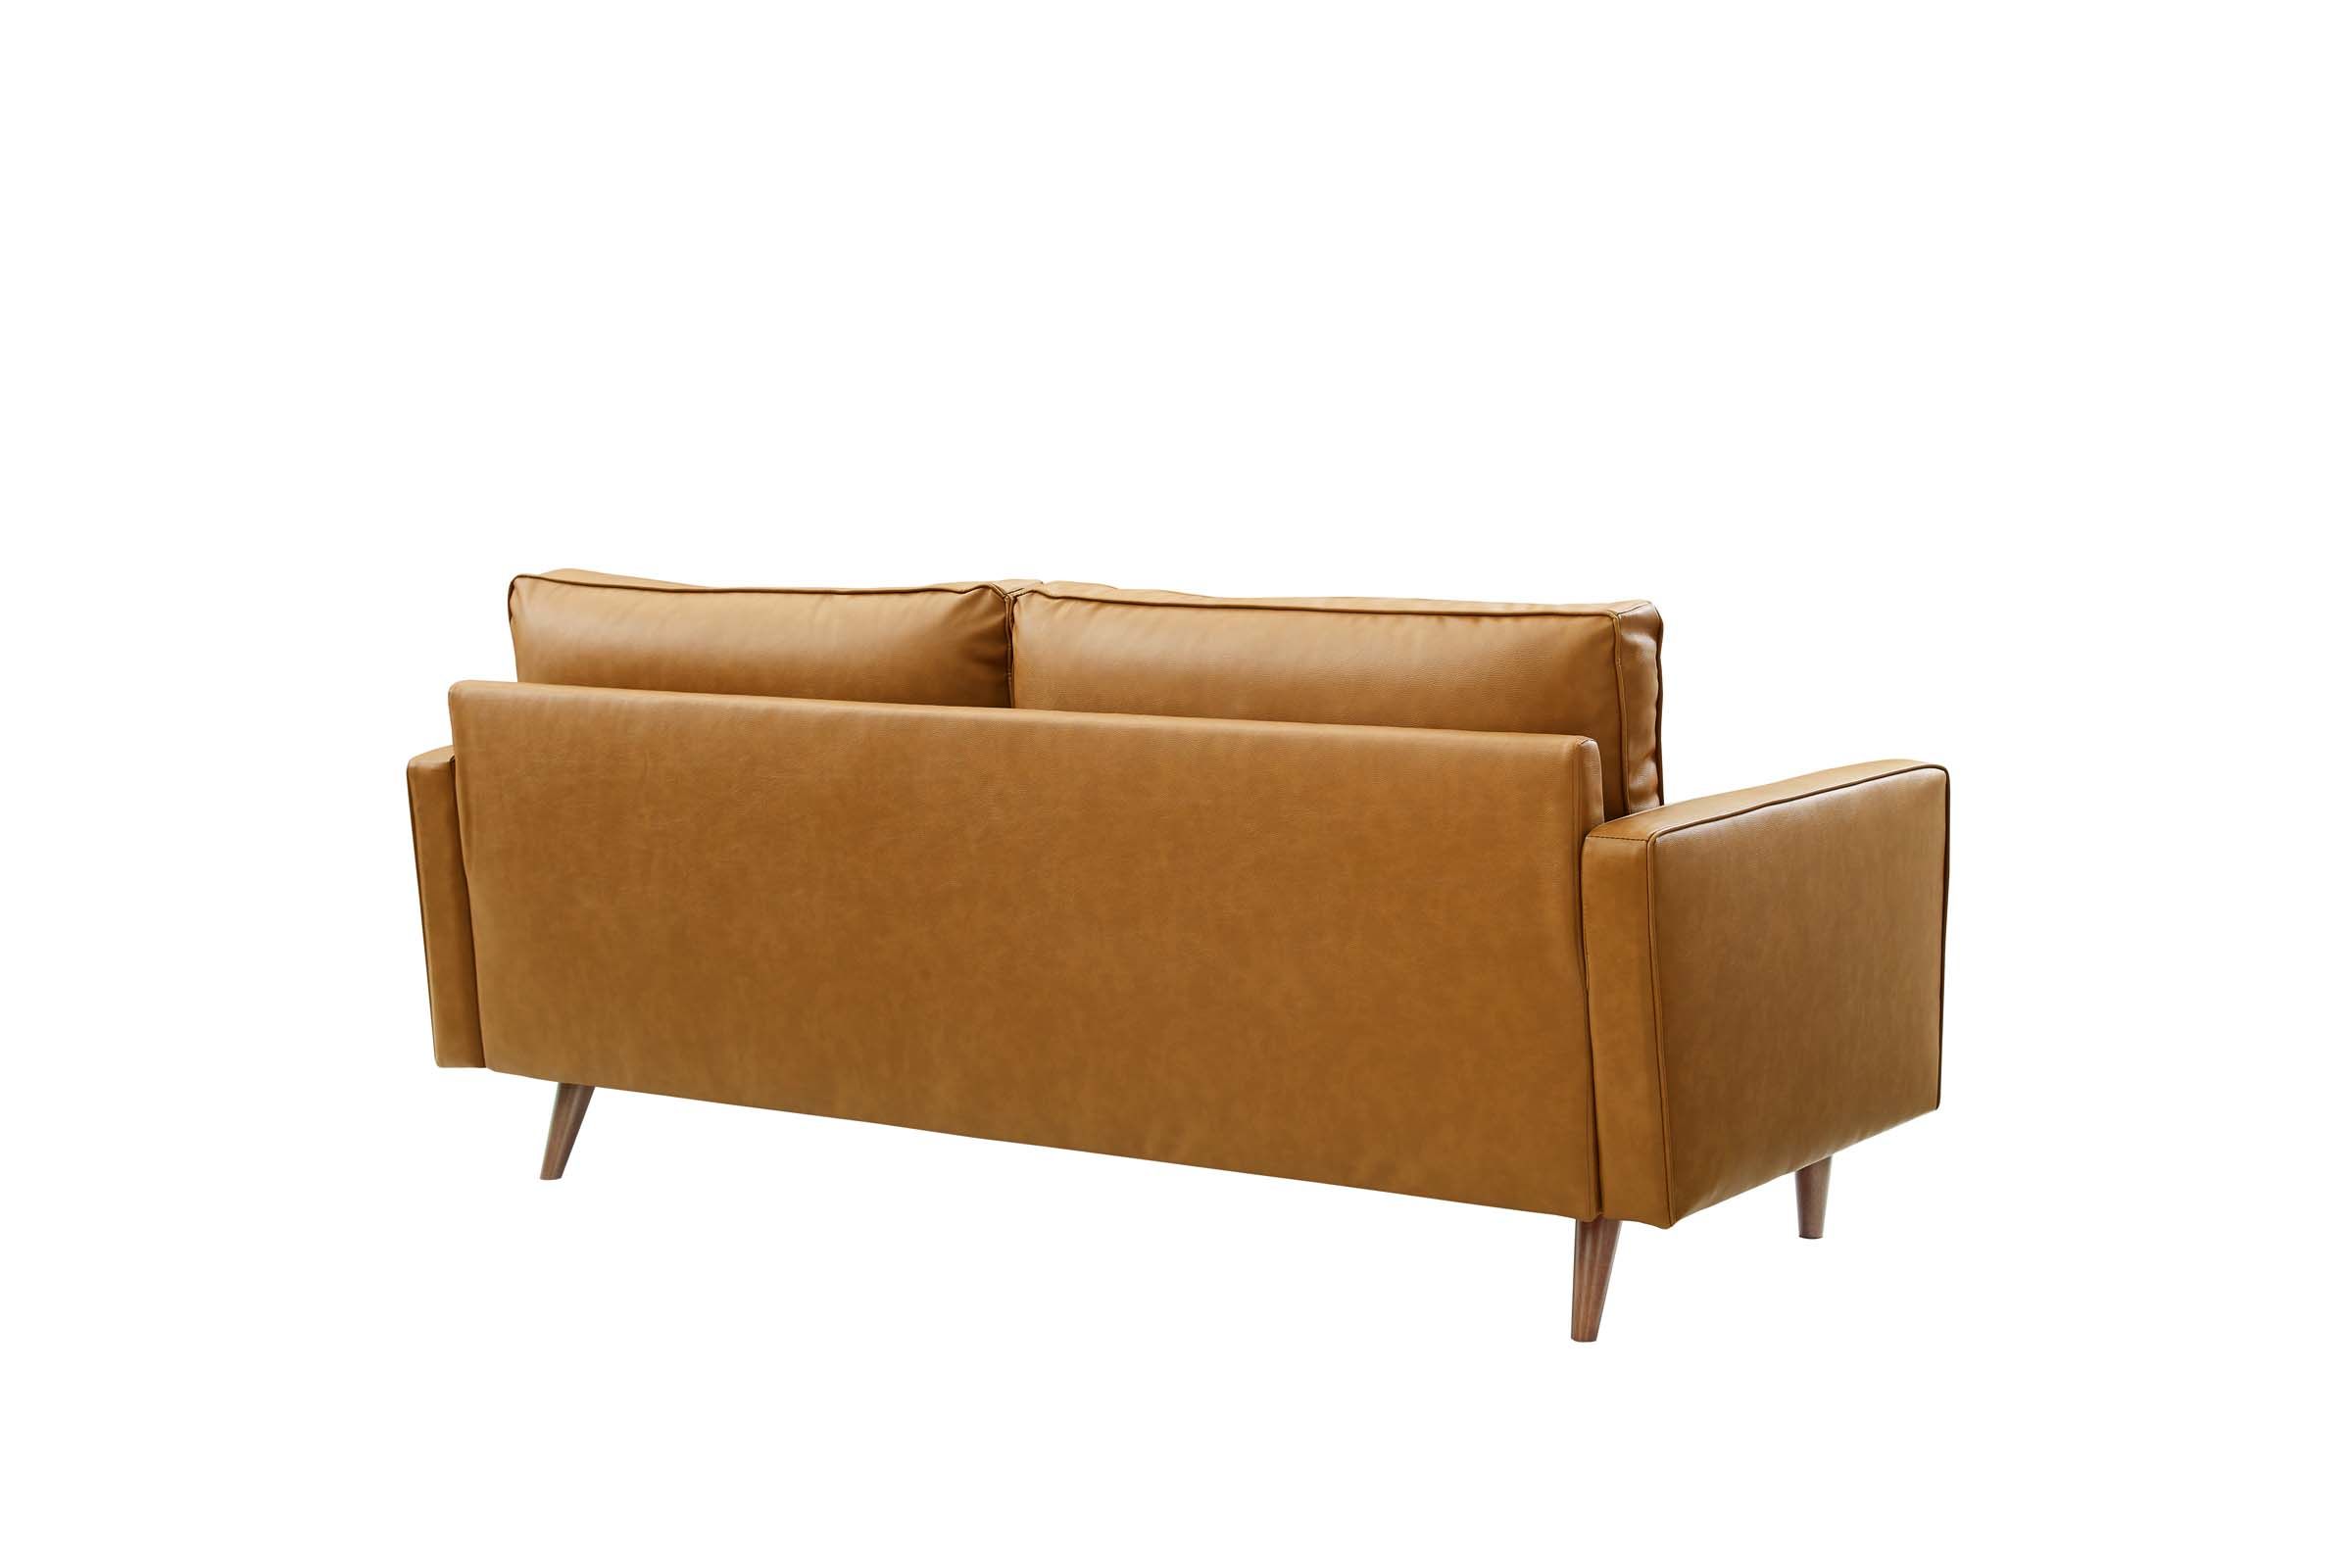 valour upholstered faux leather sofa